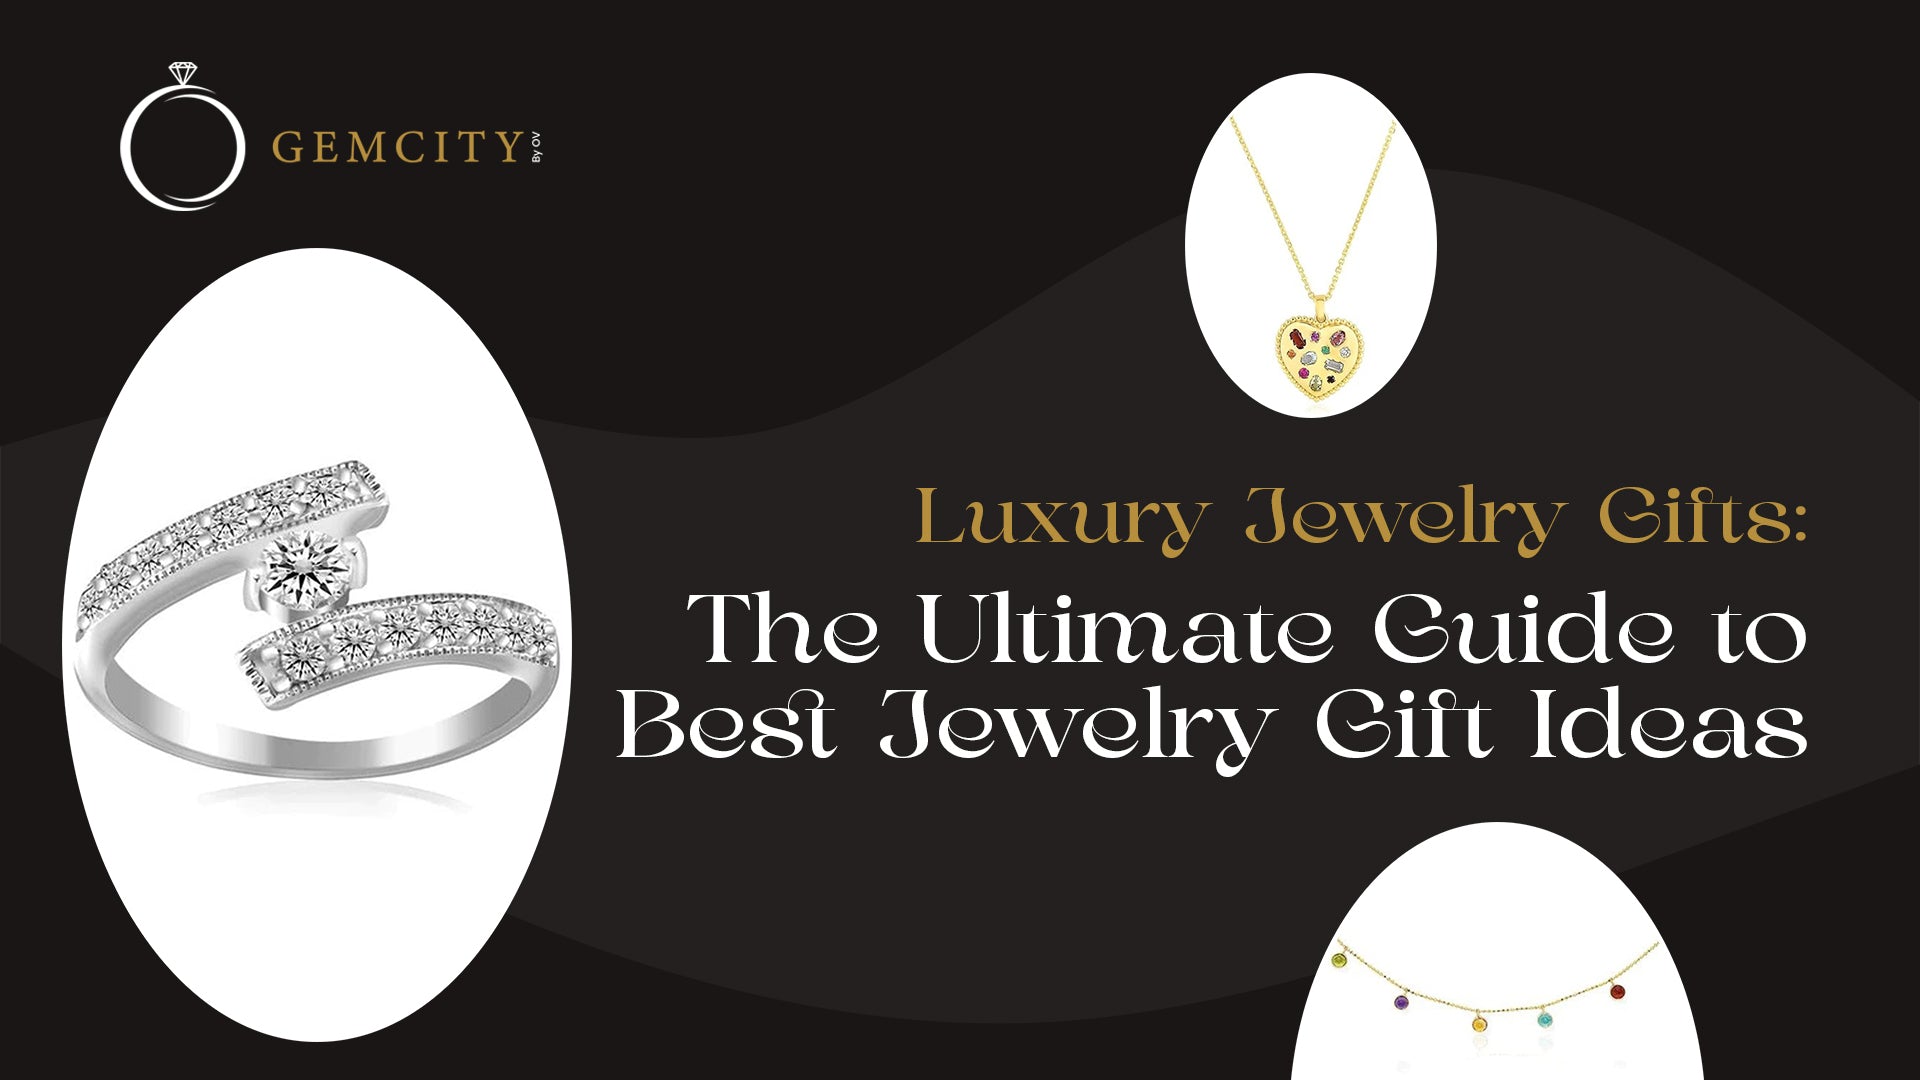 Luxury Jewelry Gifts: The Ultimate Guide to Best Jewelry Gift Ideas